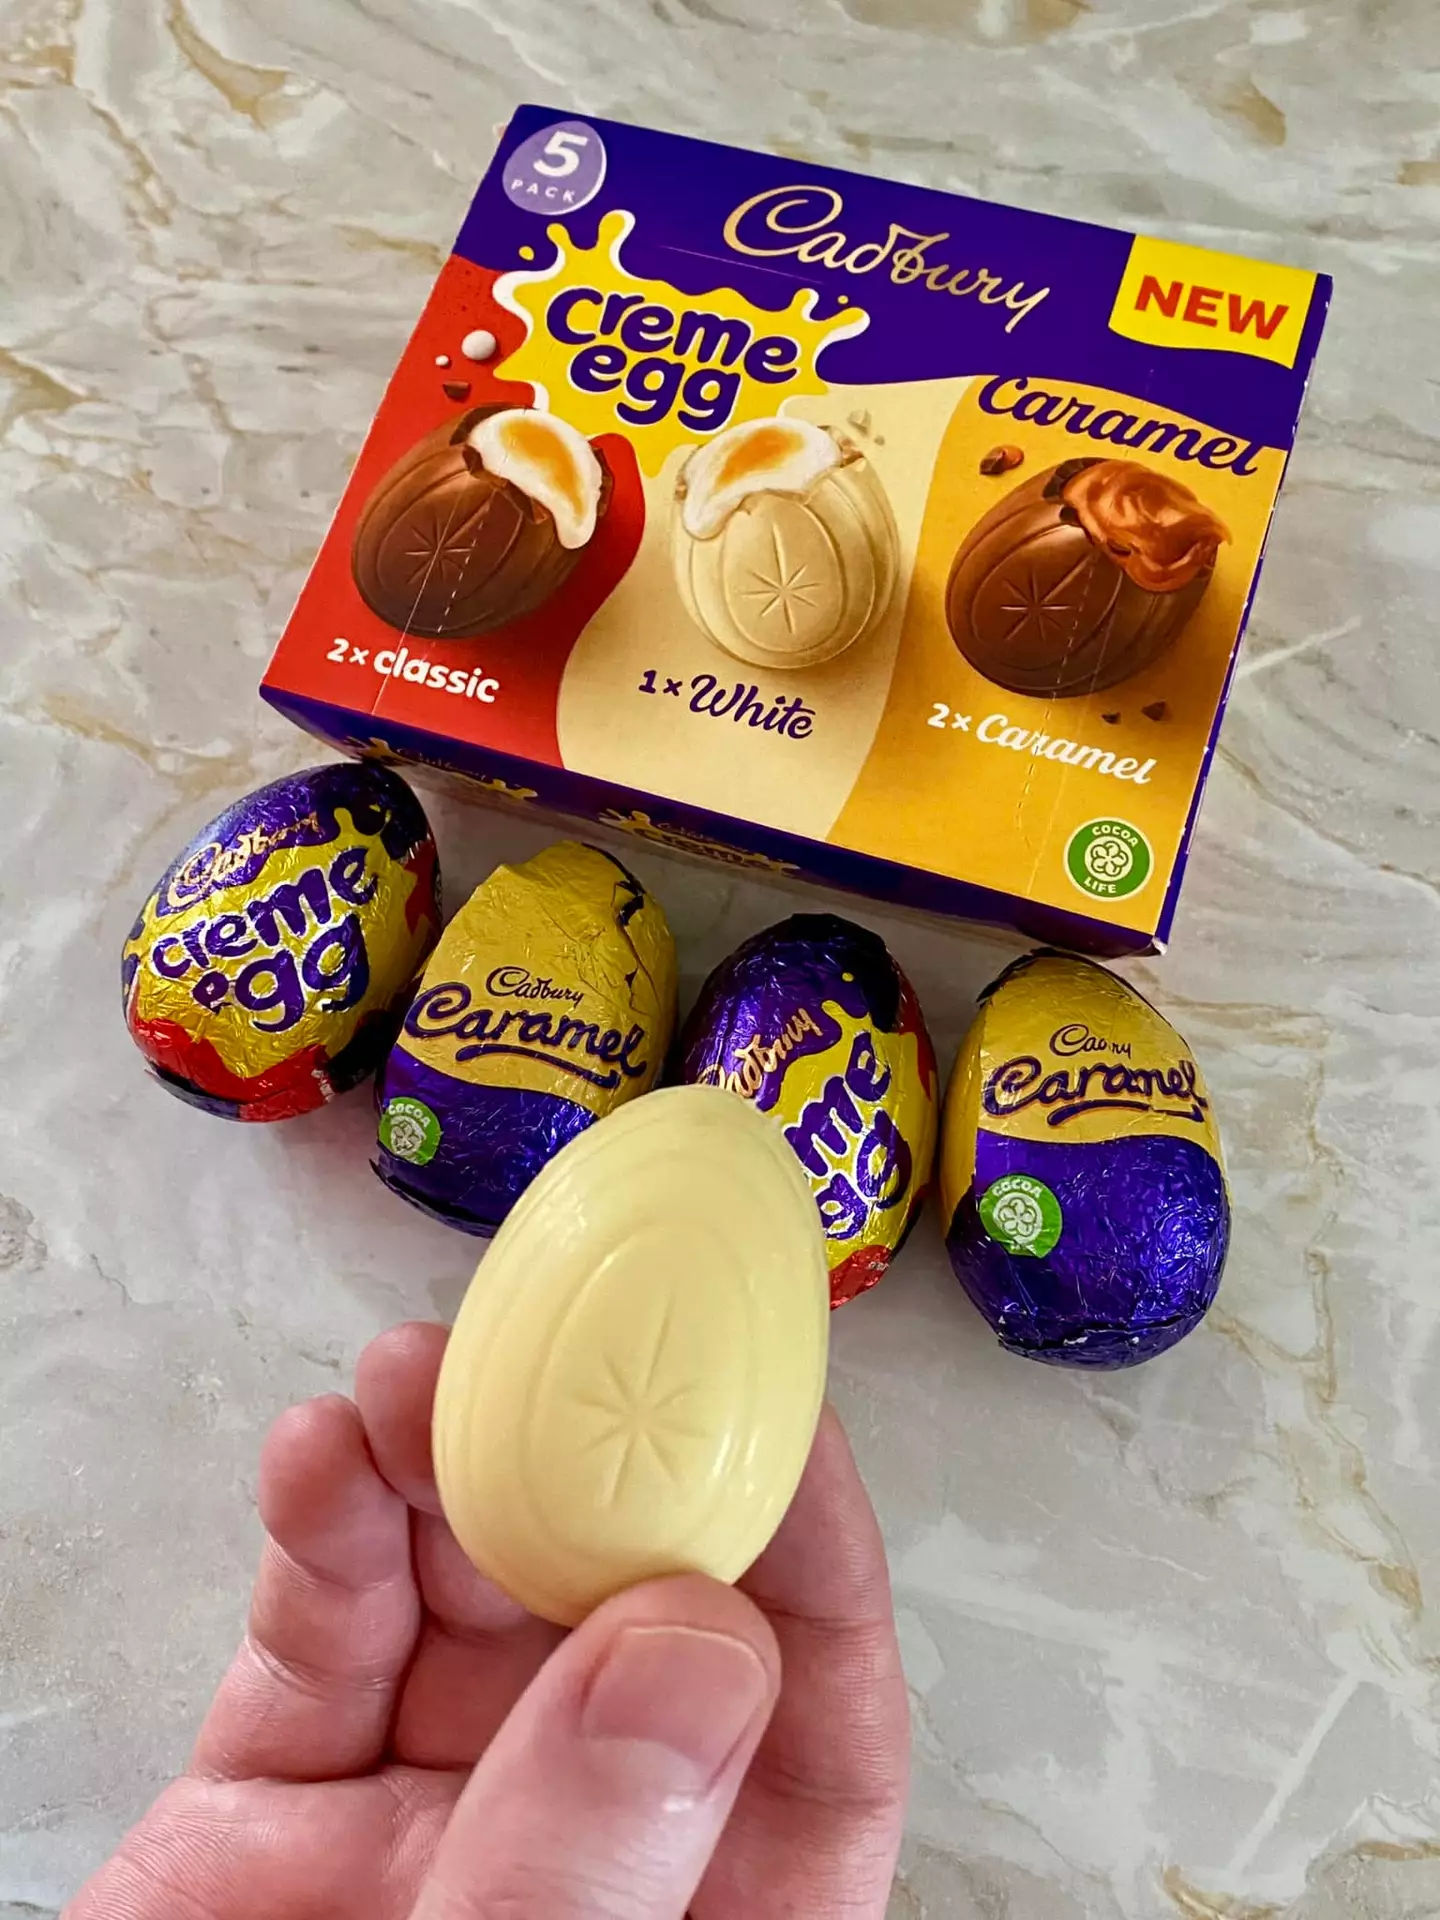 You can get your white chocolate creme eggs now, and a caramel one.